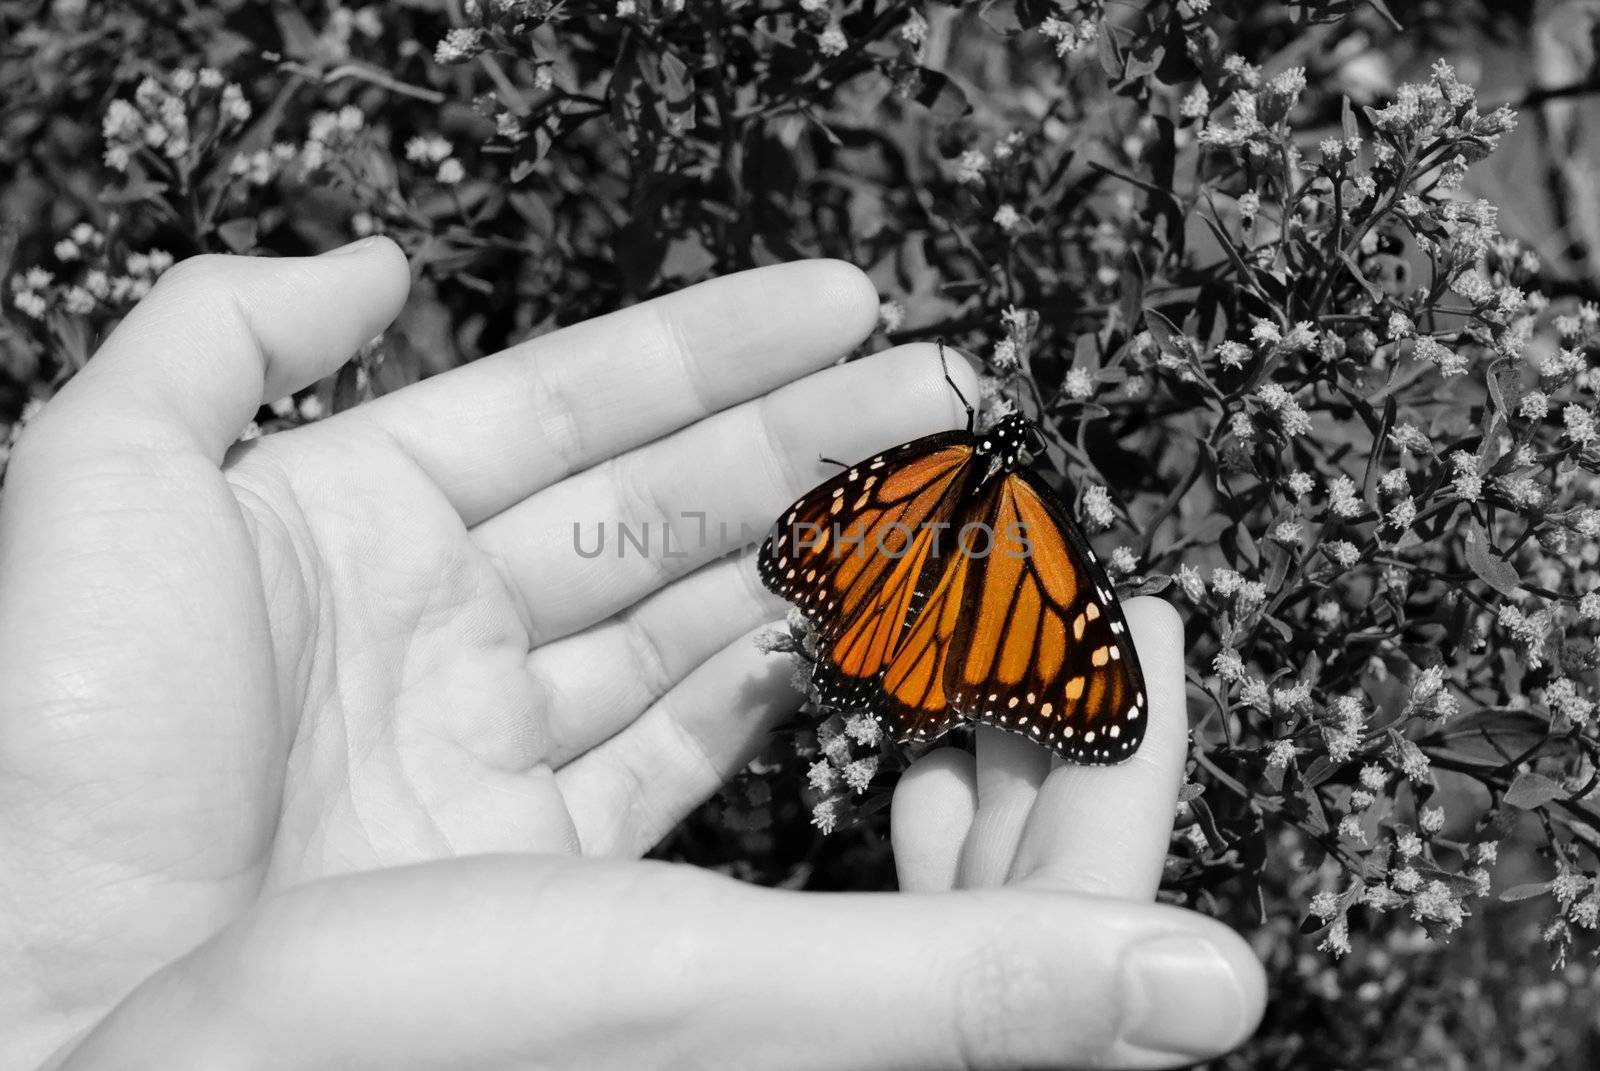 A monarch butterfly in a man's hands.